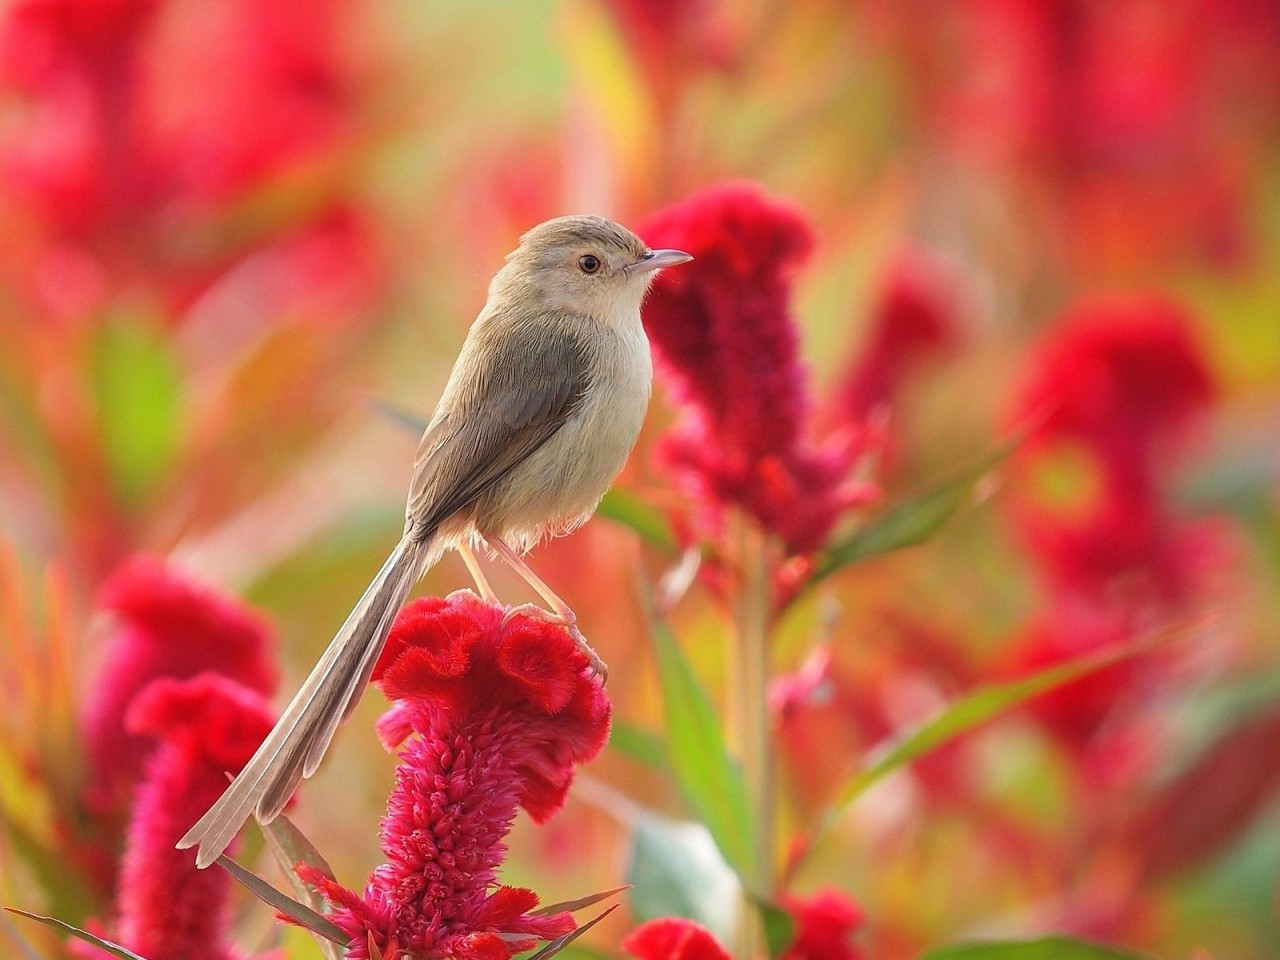 Flowers and Birds Wallpaper for Desktop and Mobile